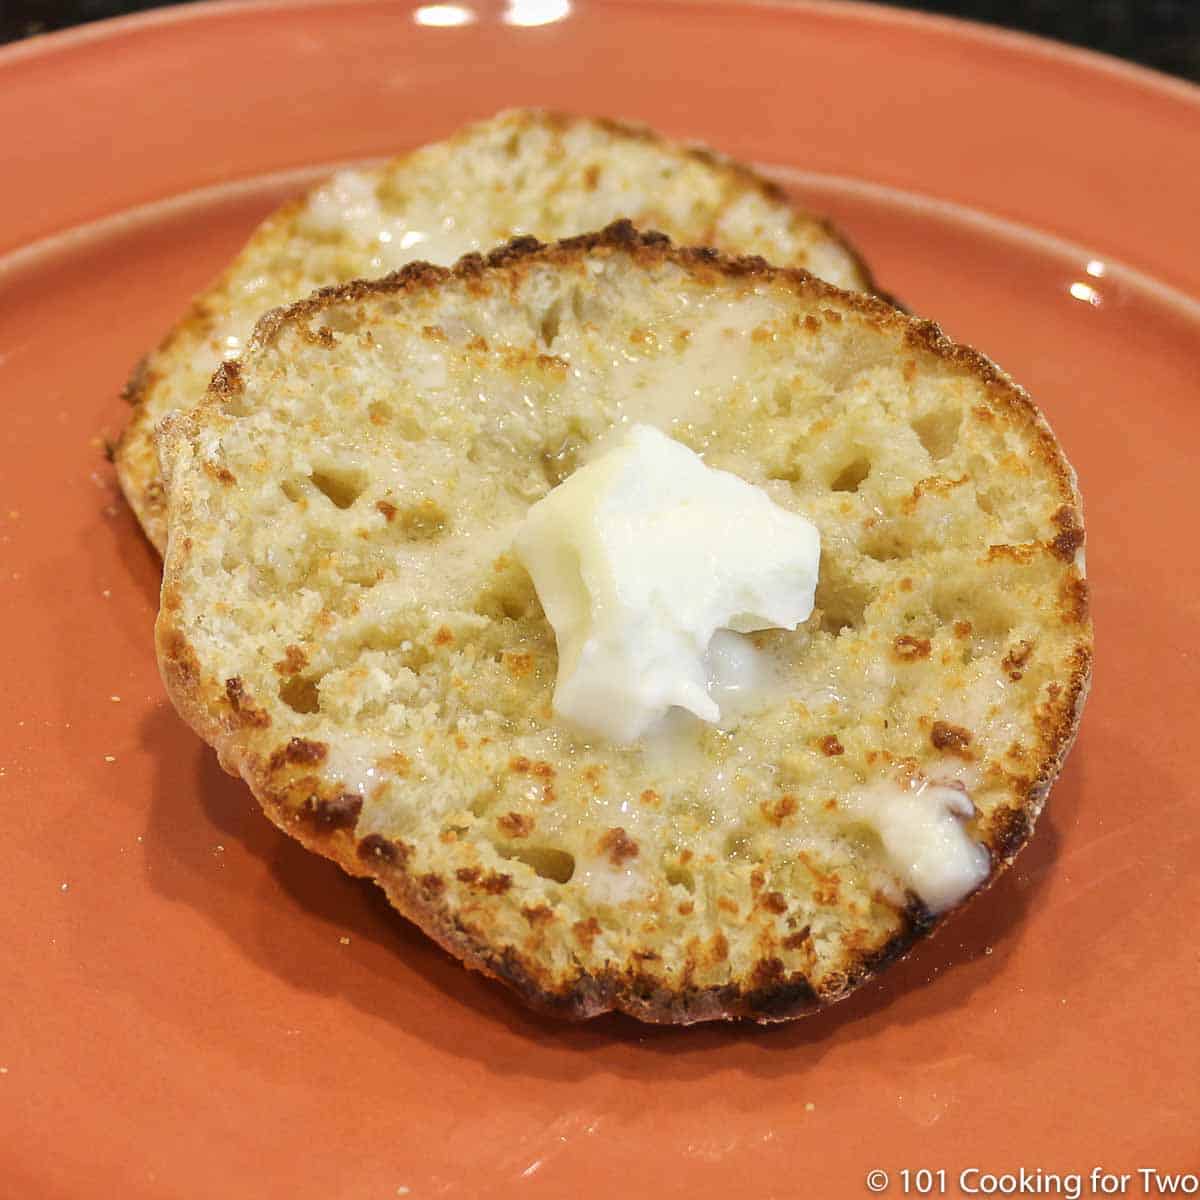 https://www.101cookingfortwo.com/wp-content/uploads/2015/05/Baked-English-Muffin-3.jpg